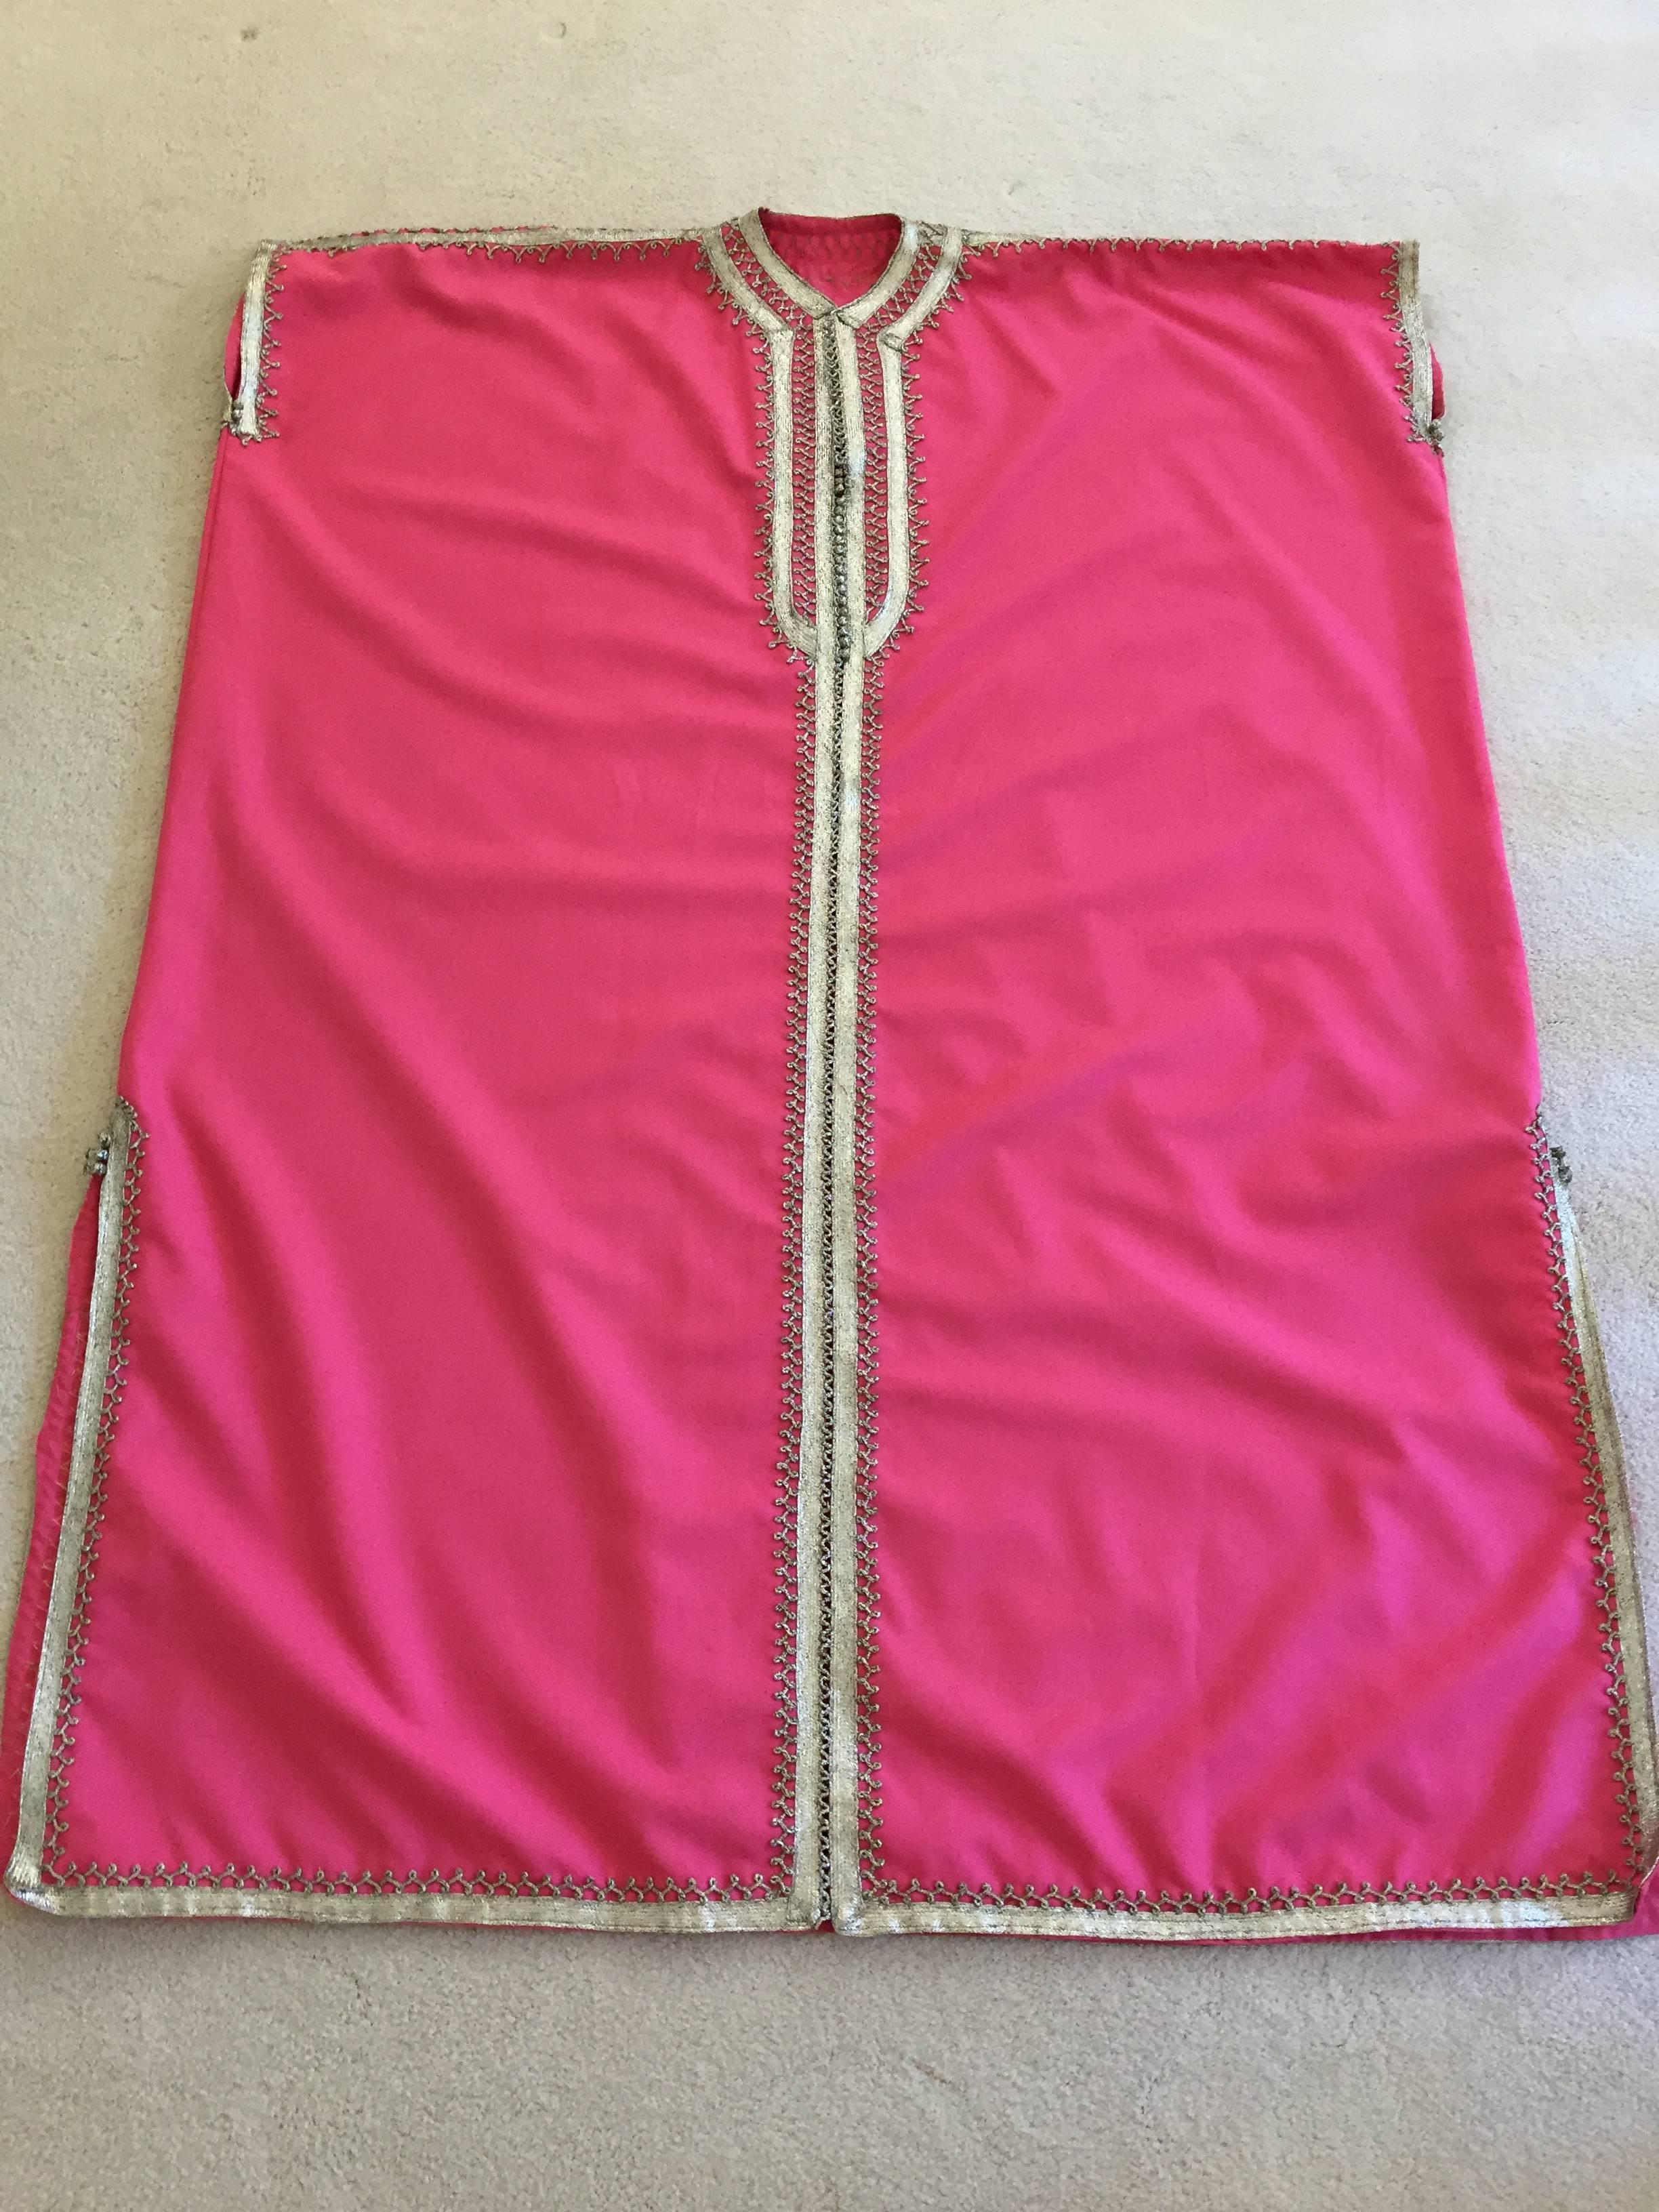 Moroccan Caftan Hot Pink Color Embroidered with Silver, Kaftan circa 1970 For Sale 2